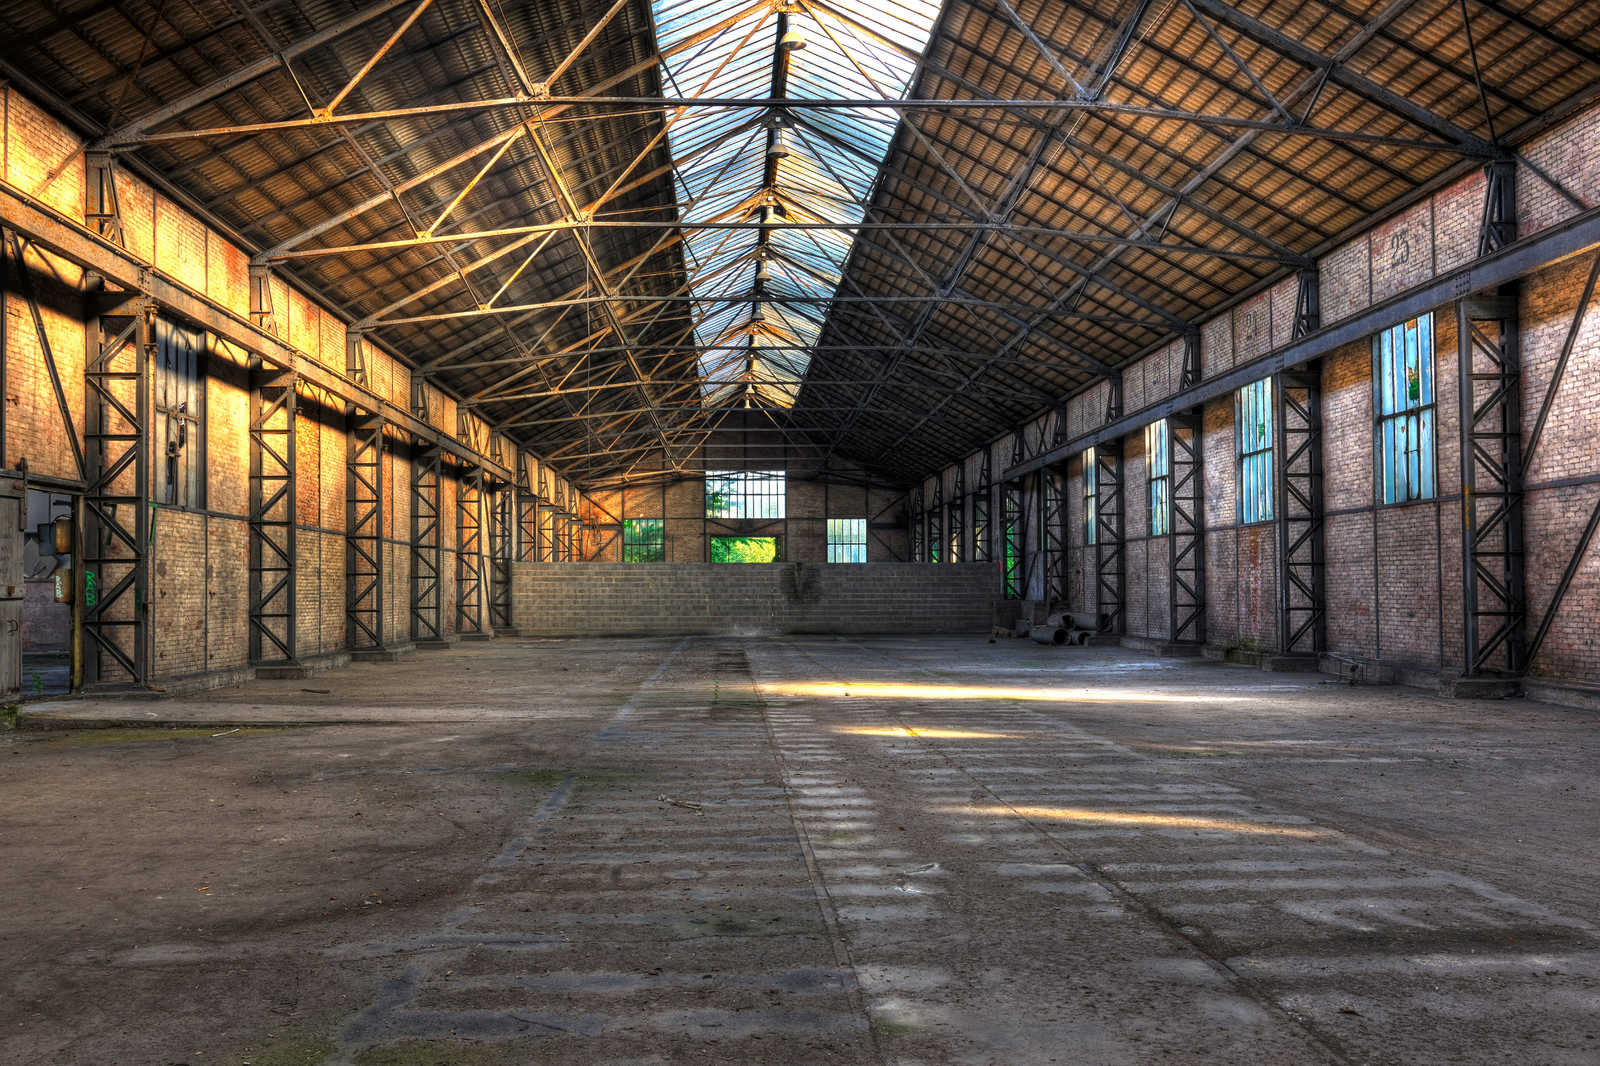             Canvas with abandoned industrial hall with 3D effect - 0.90 m x 0.60 m
        